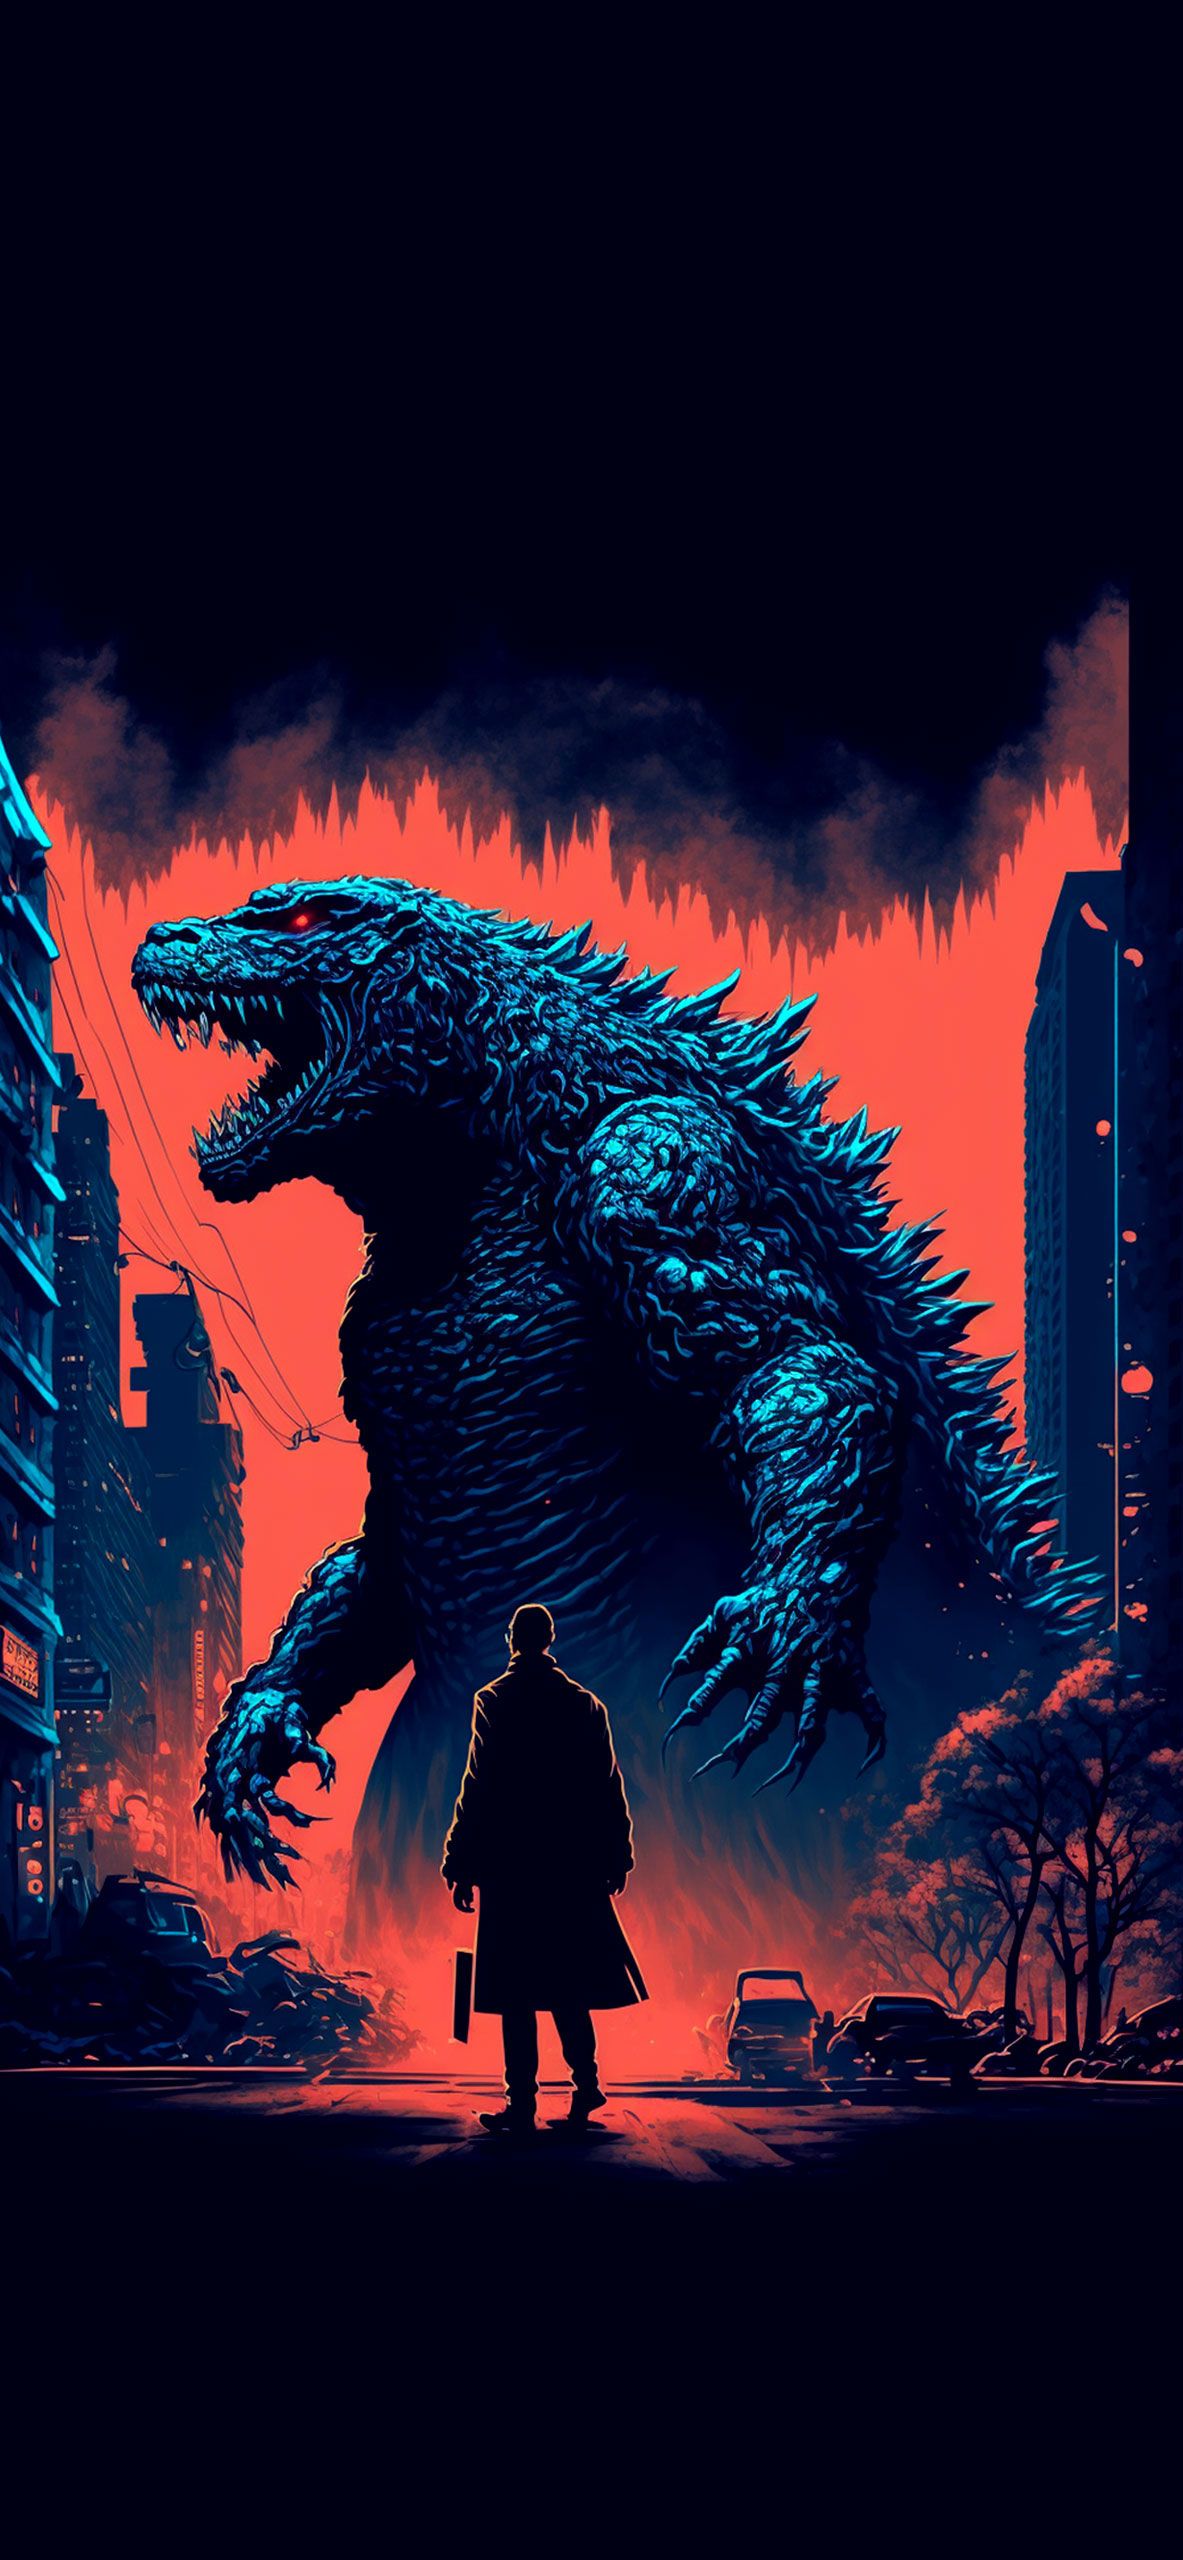 IPhone wallpaper godzilla with high-resolution 1080x1920 pixel. You can use this wallpaper for your iPhone 5, 6, 7, 8, X, XS, XR backgrounds, Mobile Screensaver, or iPad Lock Screen - City